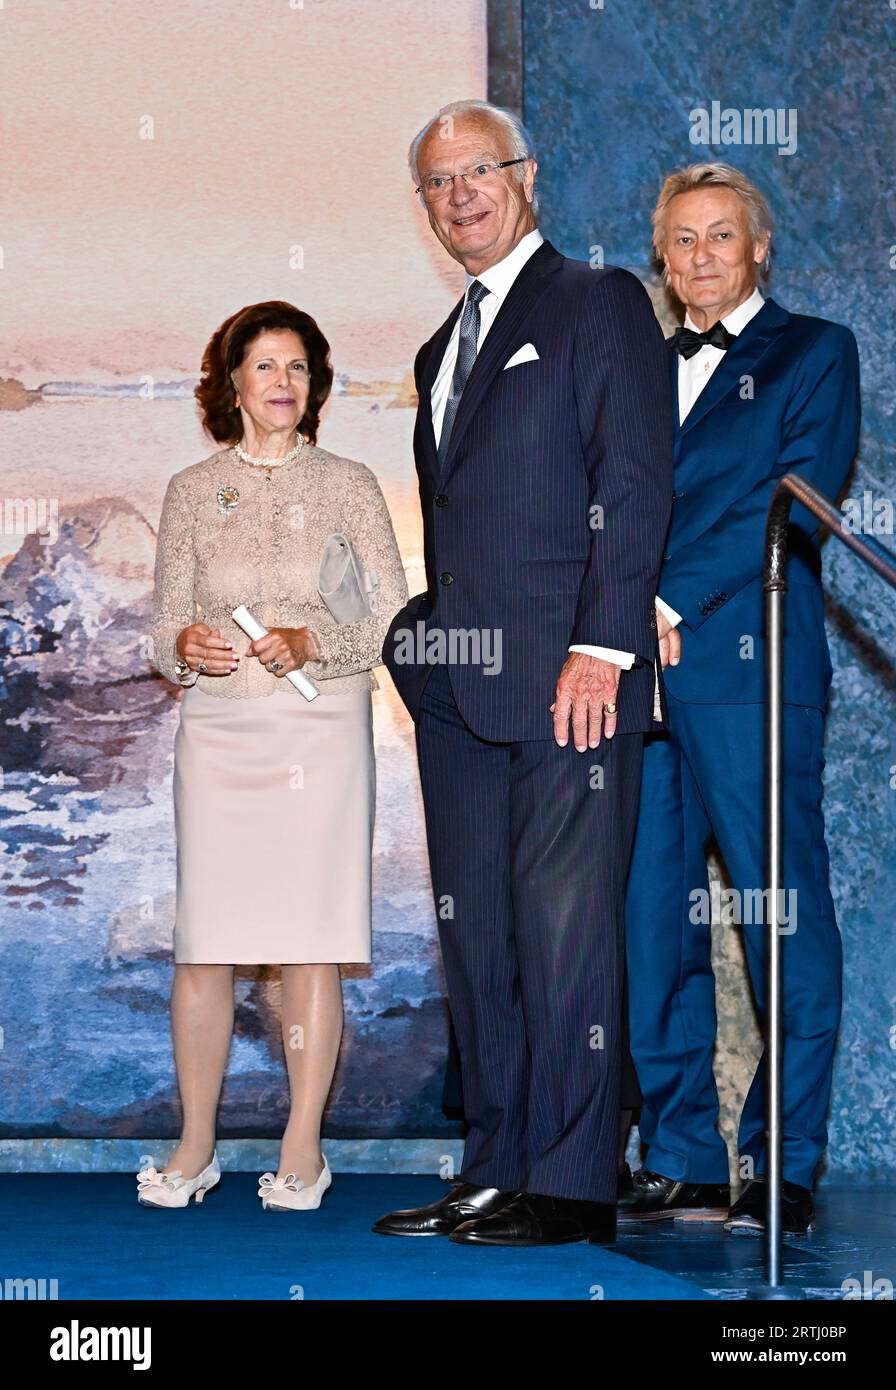 Stockholm, Sverige. 13th Sep, 2023. STOCKHOLM 20230913 King Carl Gustaf, Queen Silvia, and Swedish artist Lars Lerin at a reception at the Royal Palace in Stockholm where a gift from the parliament and government was handed over to the King, who celebrates 50 years on the throne. The gift is an eight-square meter fabric made after a watercolor painting by Swedish artist Lars Lerin. Frida Lindberg has been artistic director and weavers have been Ebba Bergström and Tova Vibrandt. Photo: Jonas Ekstromer/TT/code 10030 Credit: TT News Agency/Alamy Live News Stock Photo